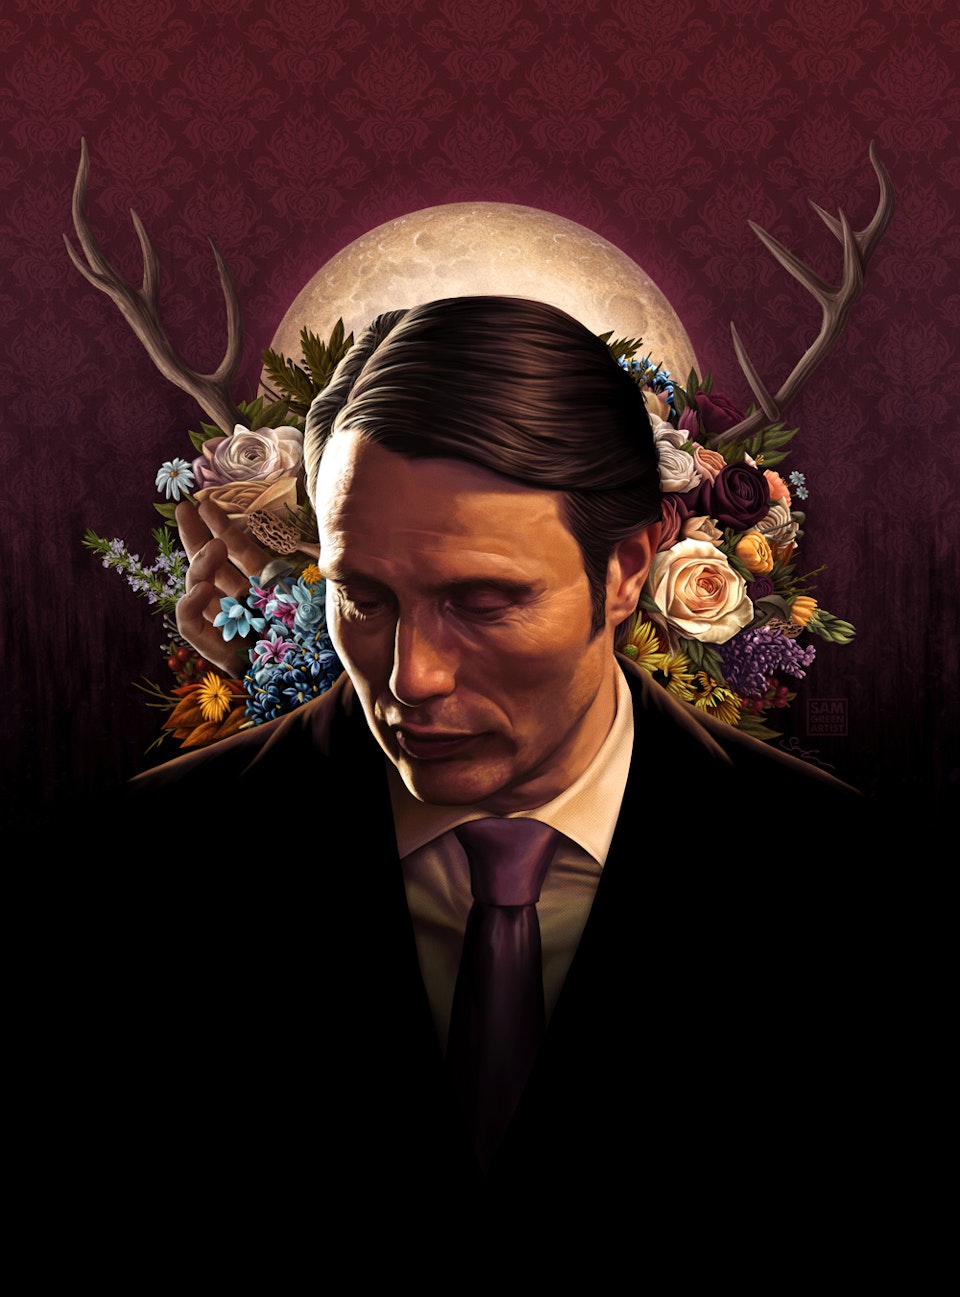 Hannibal - Officially licensed artwork - Officially licensed 'Hannibal' art print design, created for the 'Hannibal' art book published by Printed In Blood.

Also available as an officially licensed print via PosterPosse. 18x 24 inches.

Illustrated in Procreate on iPad Pro.